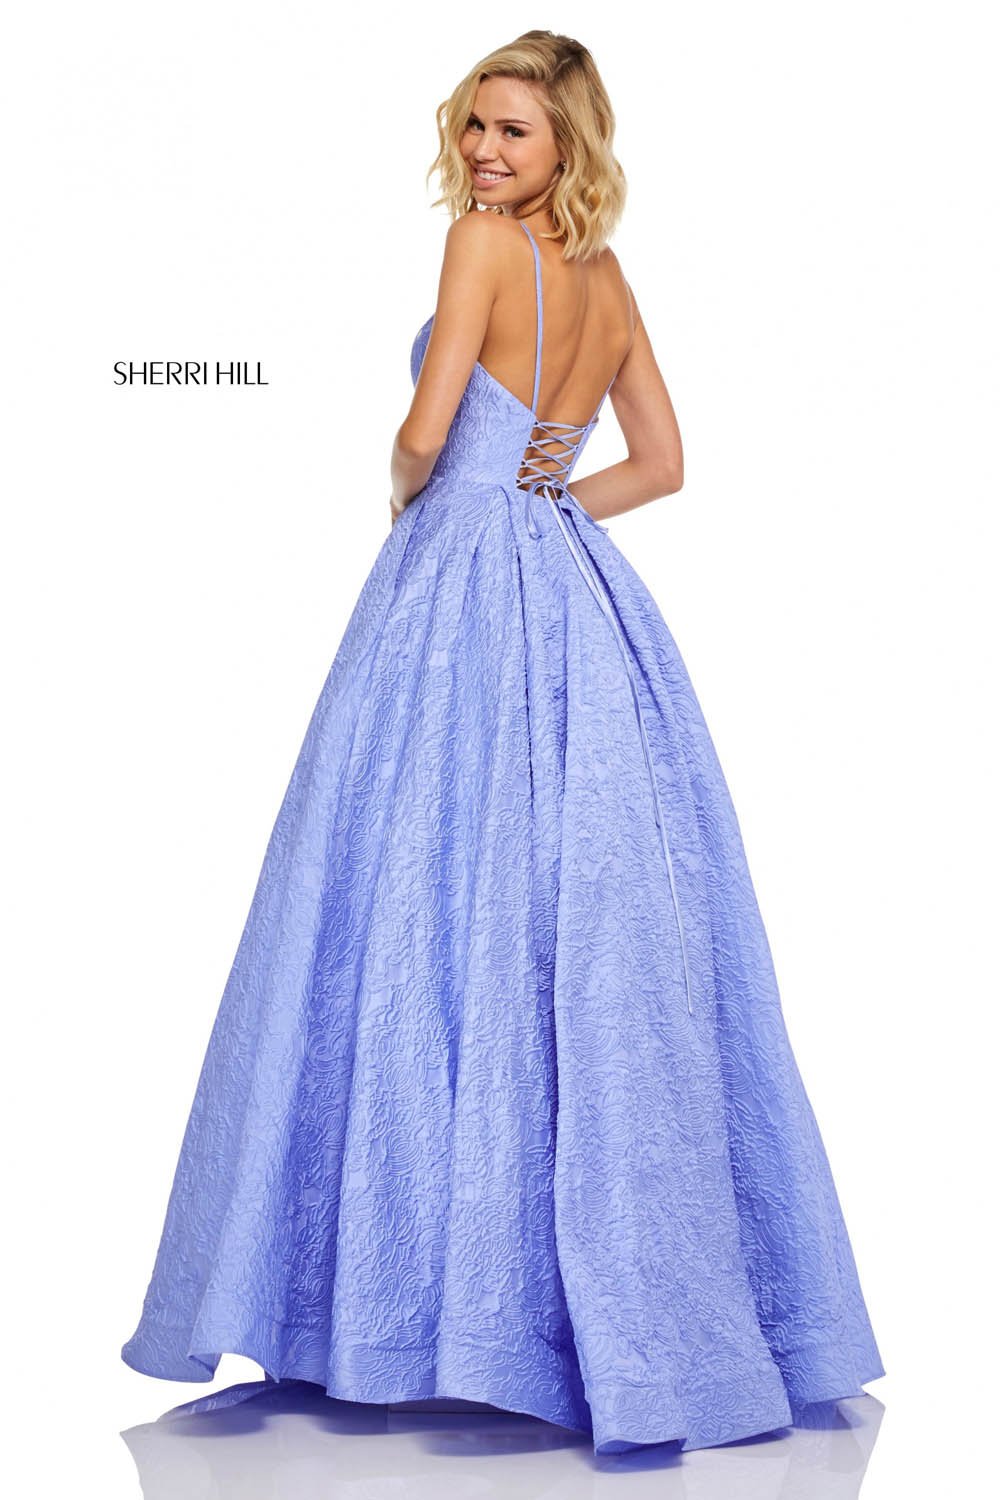 Sherri Hill 52641 dress images in these colors: Ivory, Periwinkle, Pink.